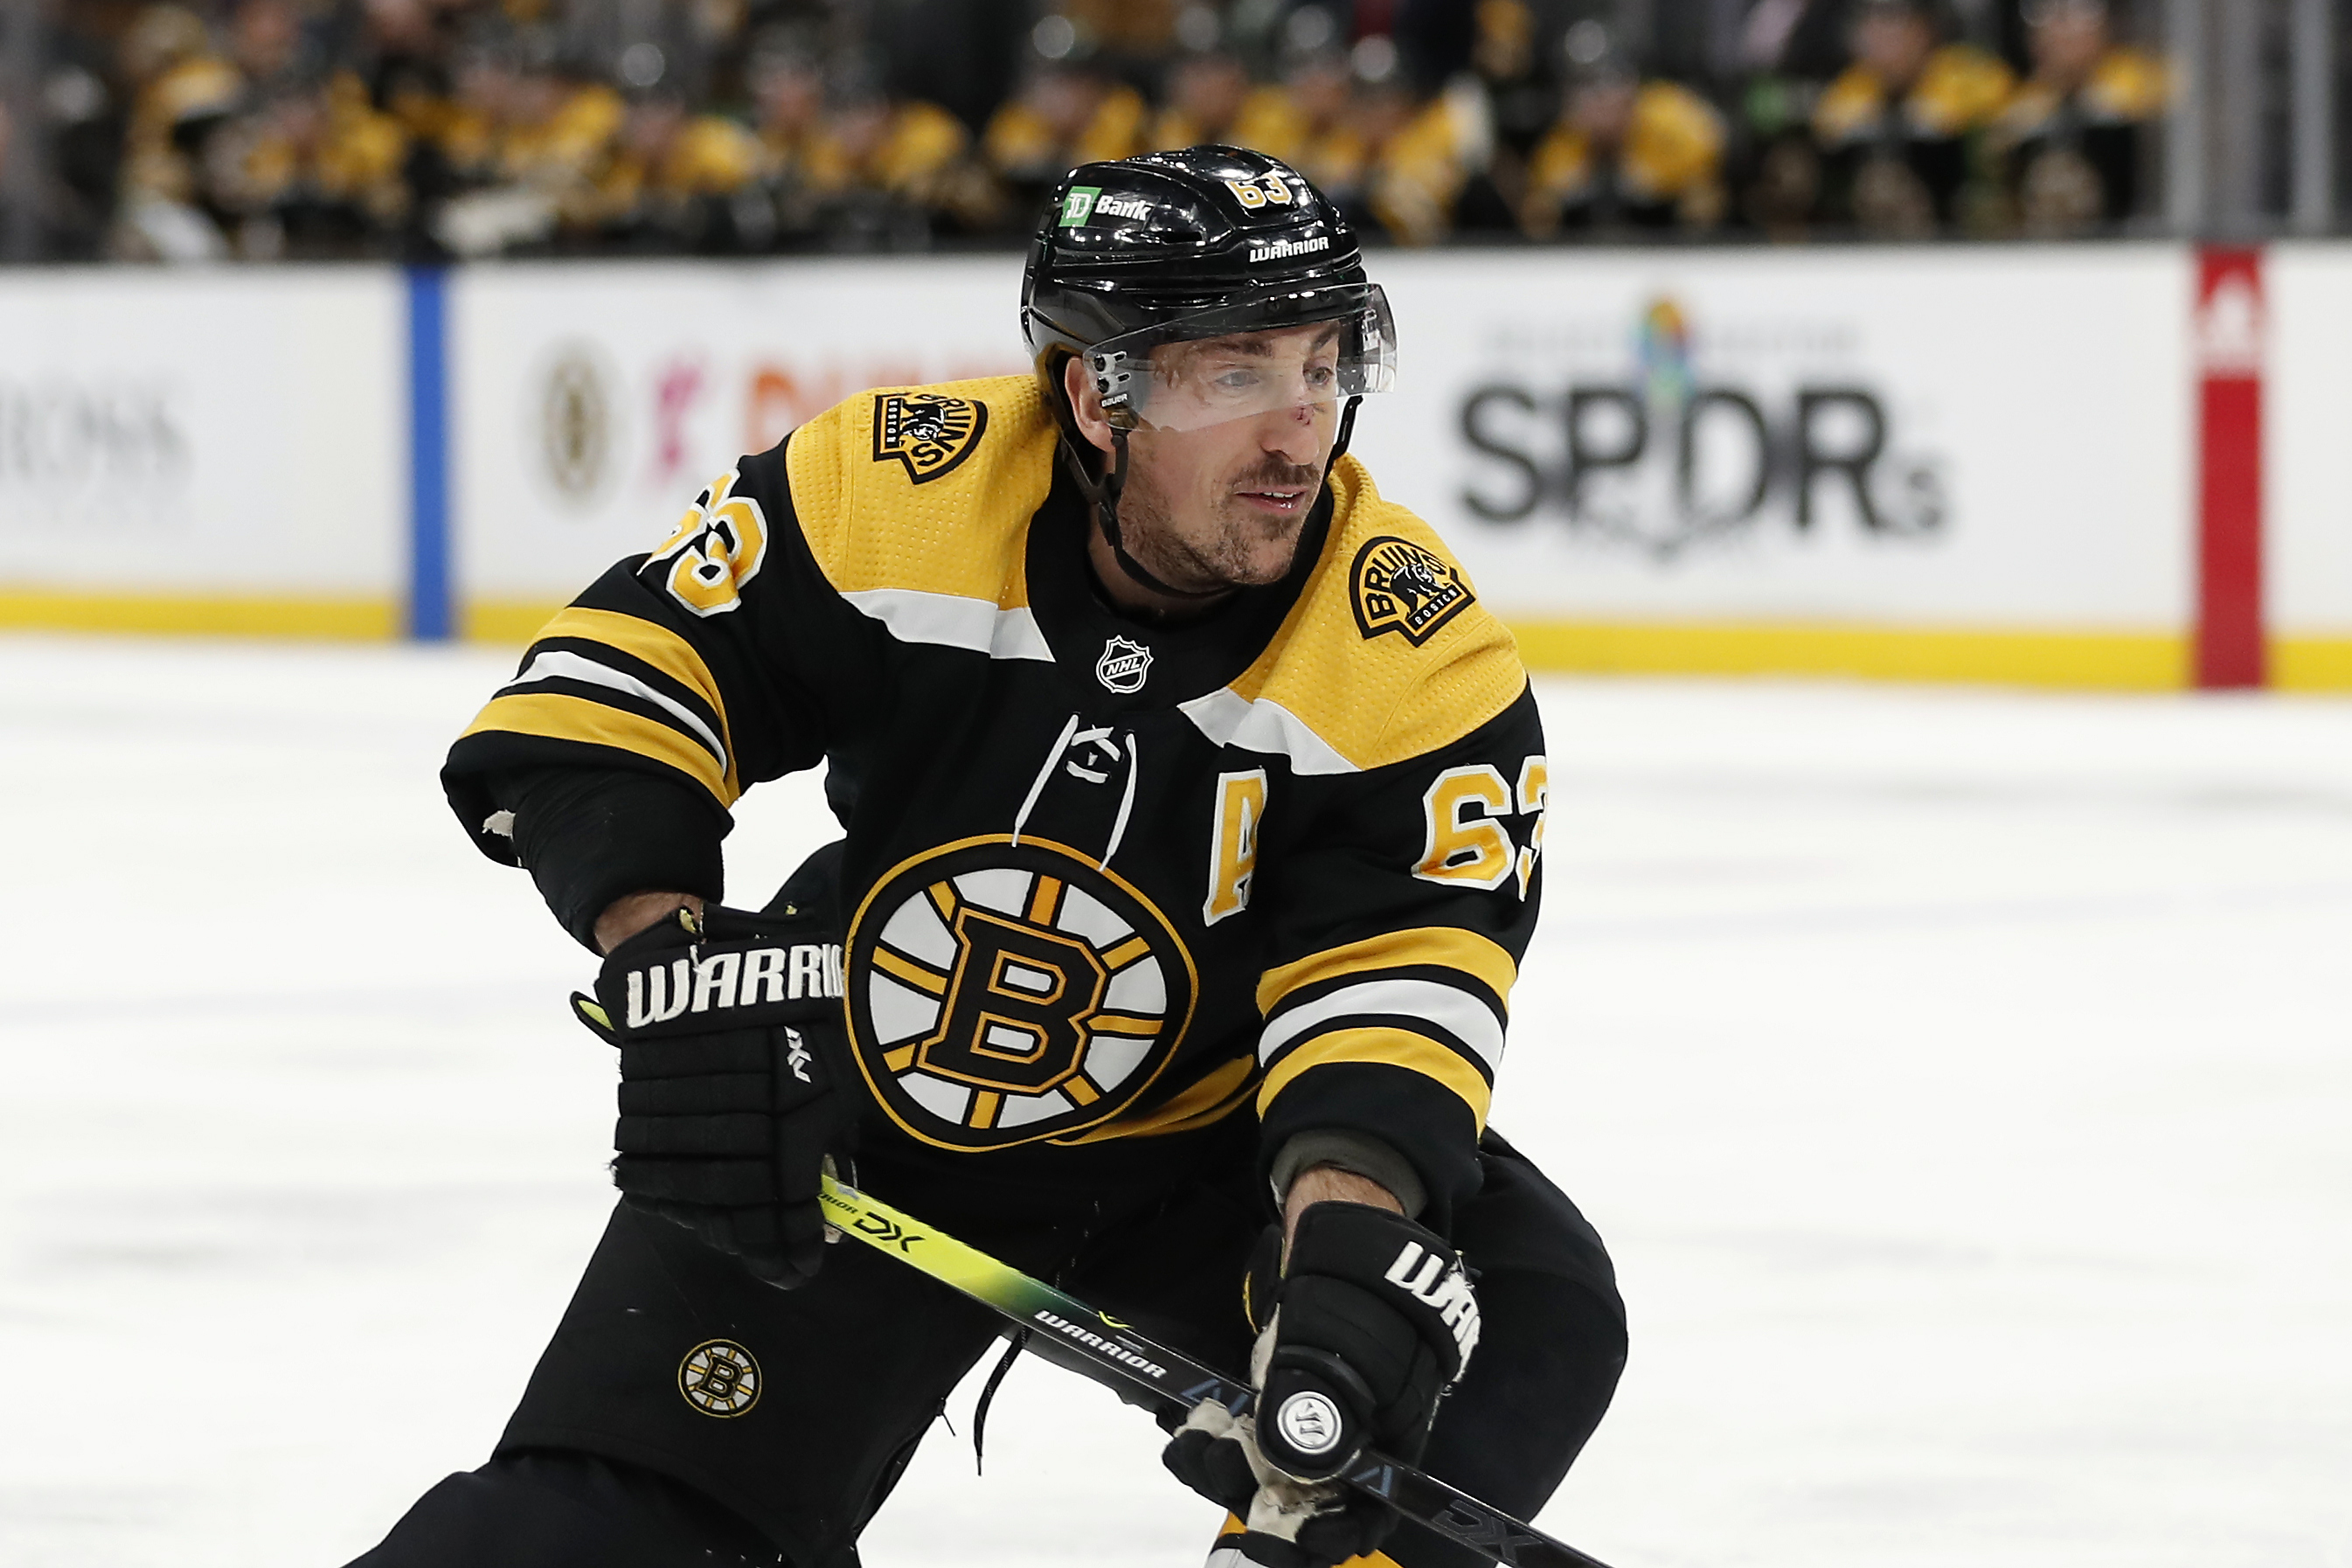 Brad Marchand and Patrice Bergeron got rather intimate at Charlie